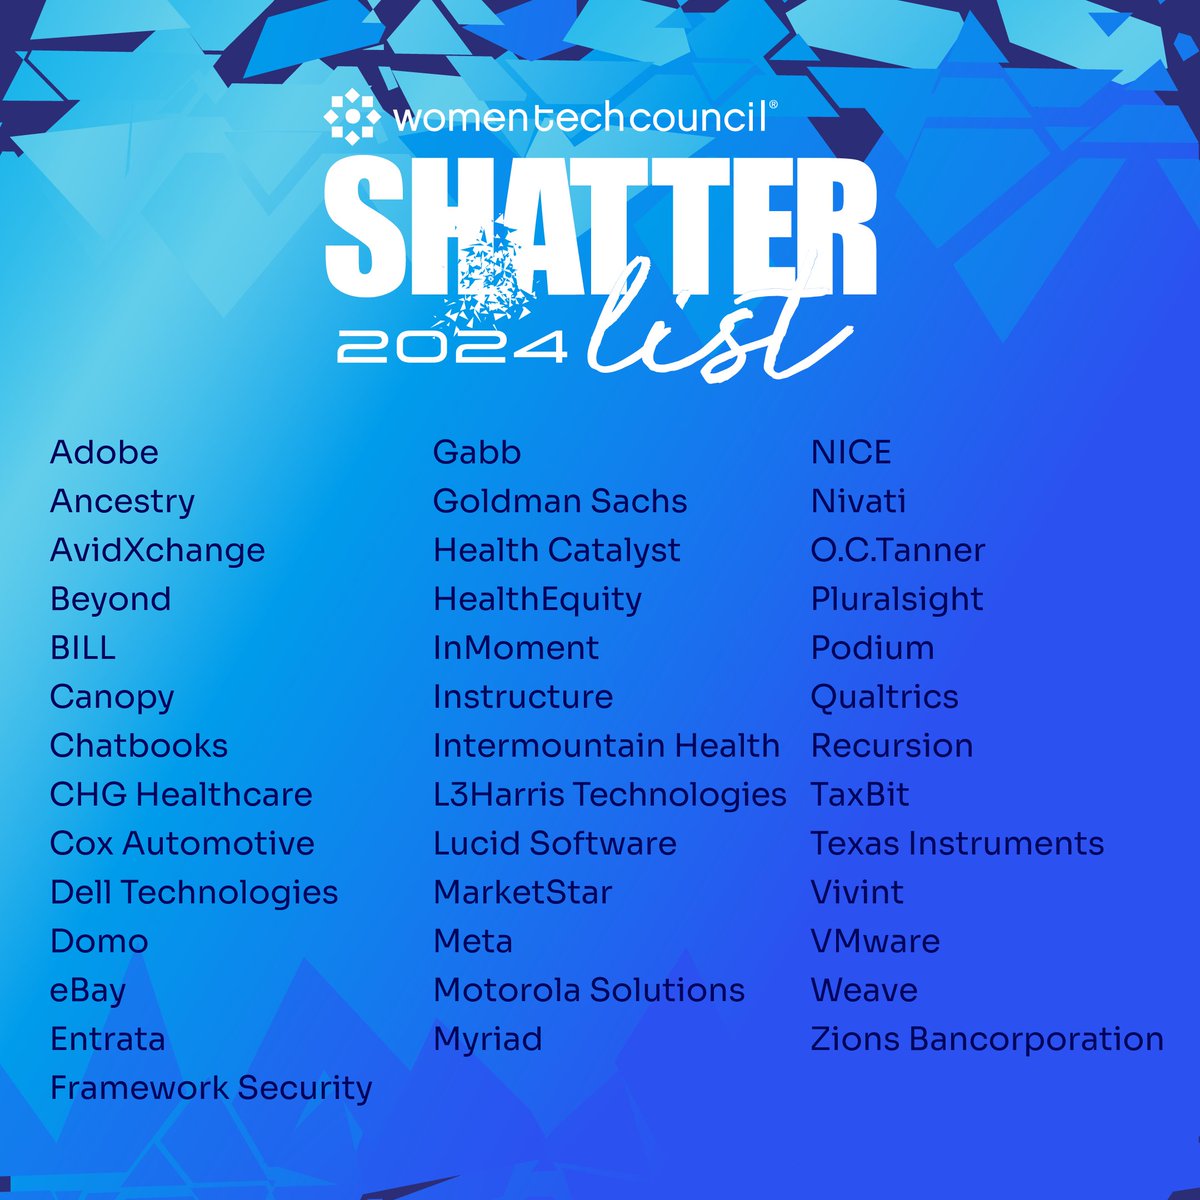 Thrilled to announce: MarketStar has been named to the @WomenTechCncl Shatter List for the 7th consecutive year! This recognition celebrates our commitment to shattering the glass ceiling and advancing women in business. #ShatterList2024 #OneMarketStar